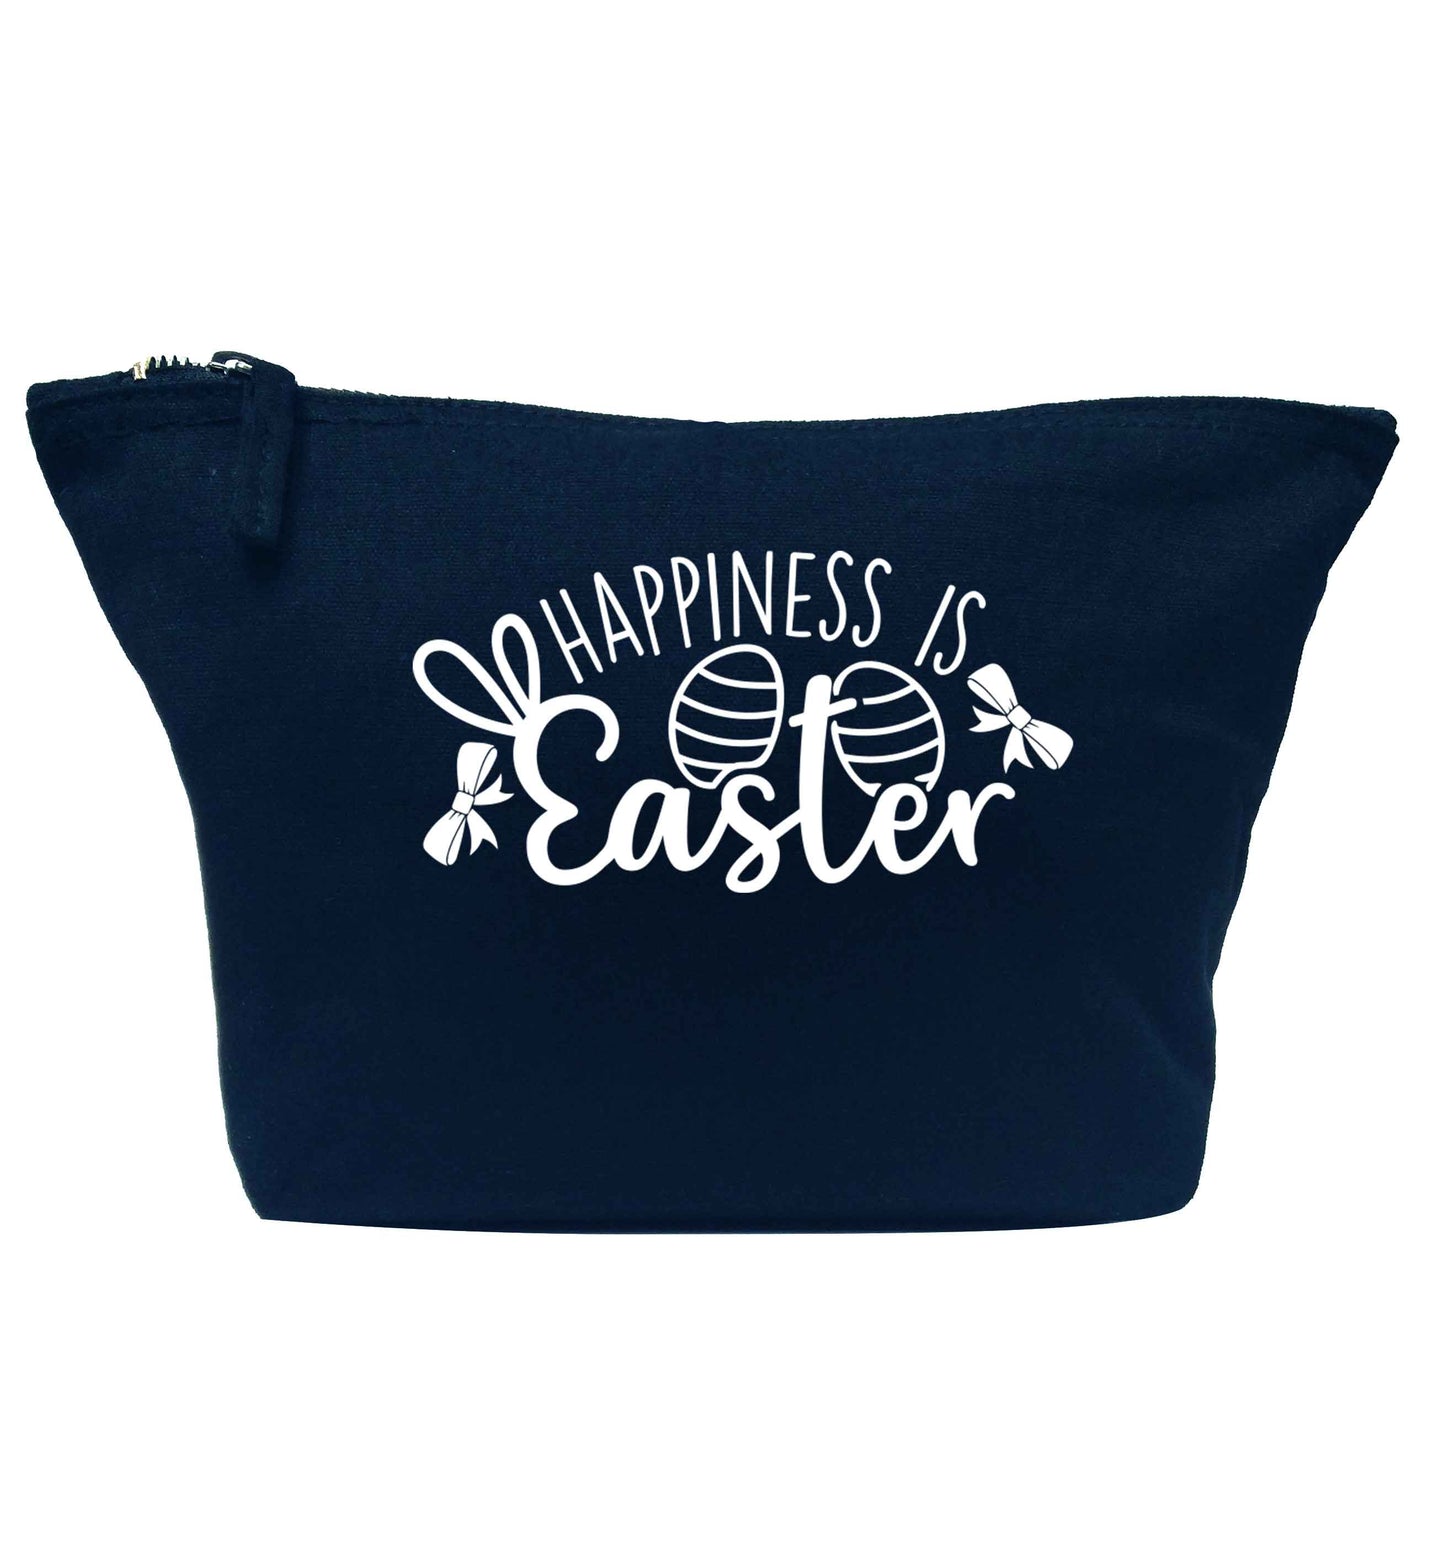 Happiness is easter navy makeup bag